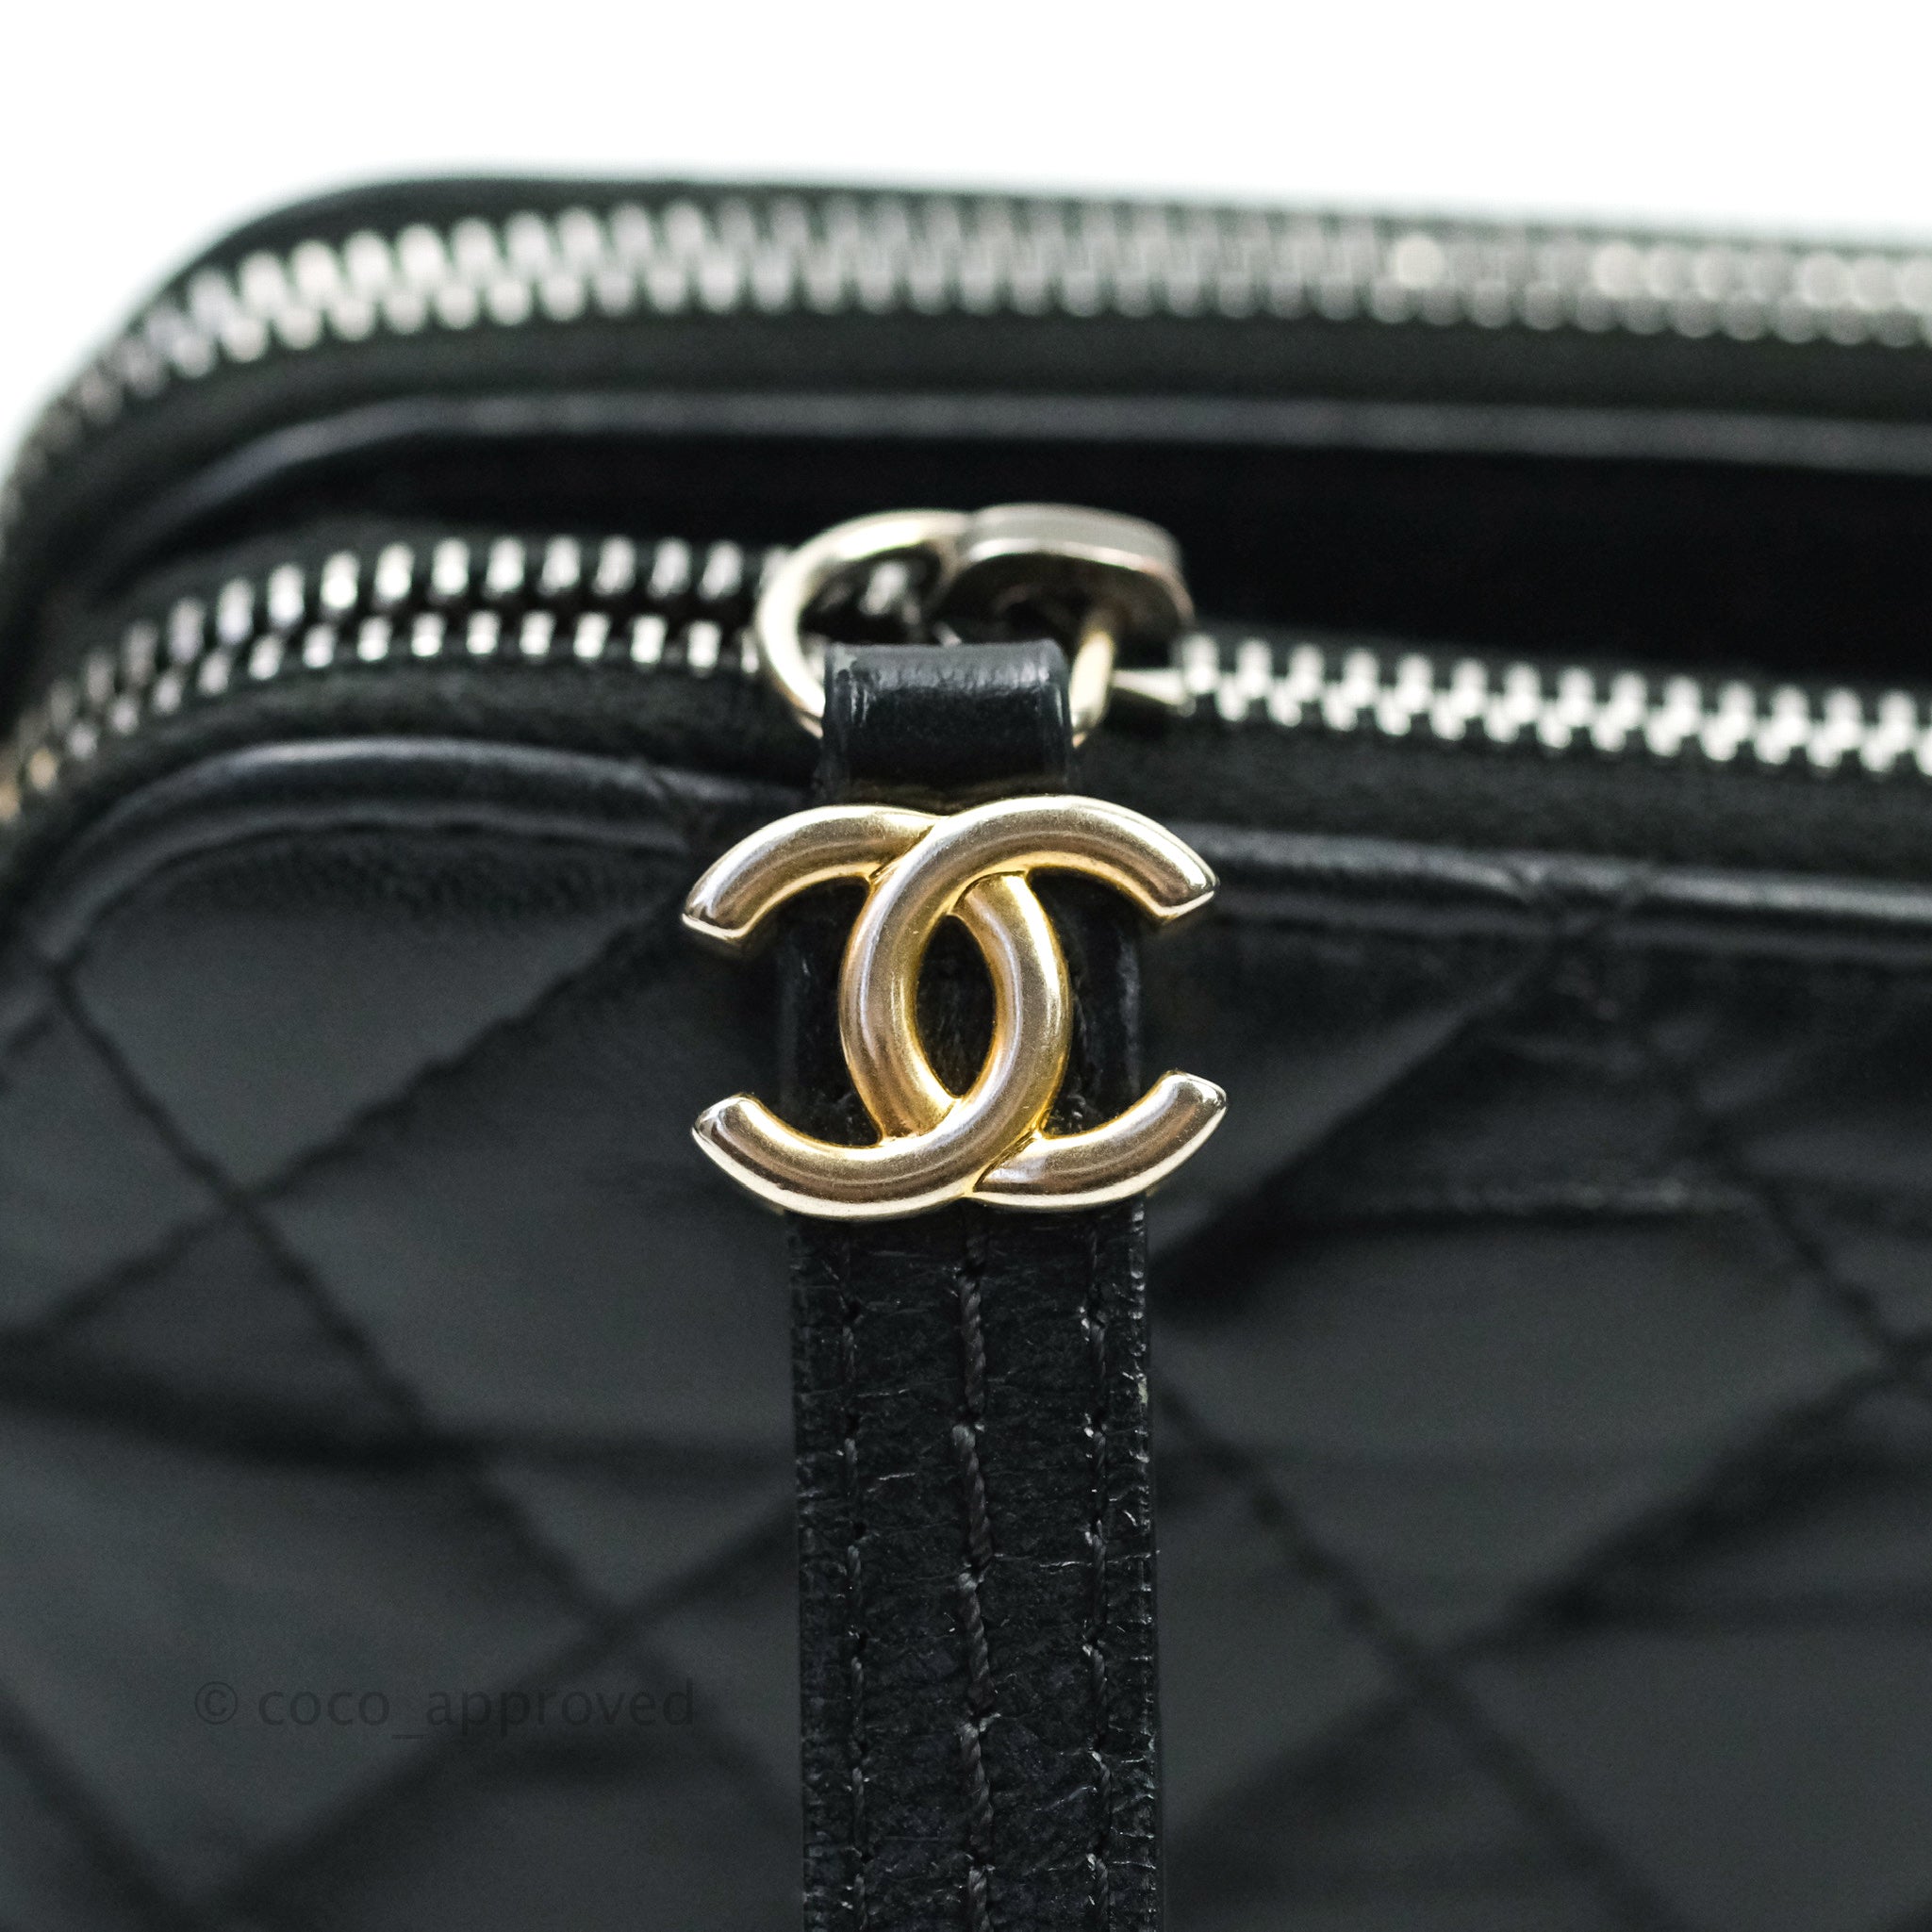 Chanel Gabrielle Double Zip Clutch with Chain Quilted Ombre Calfskin Brown  954922